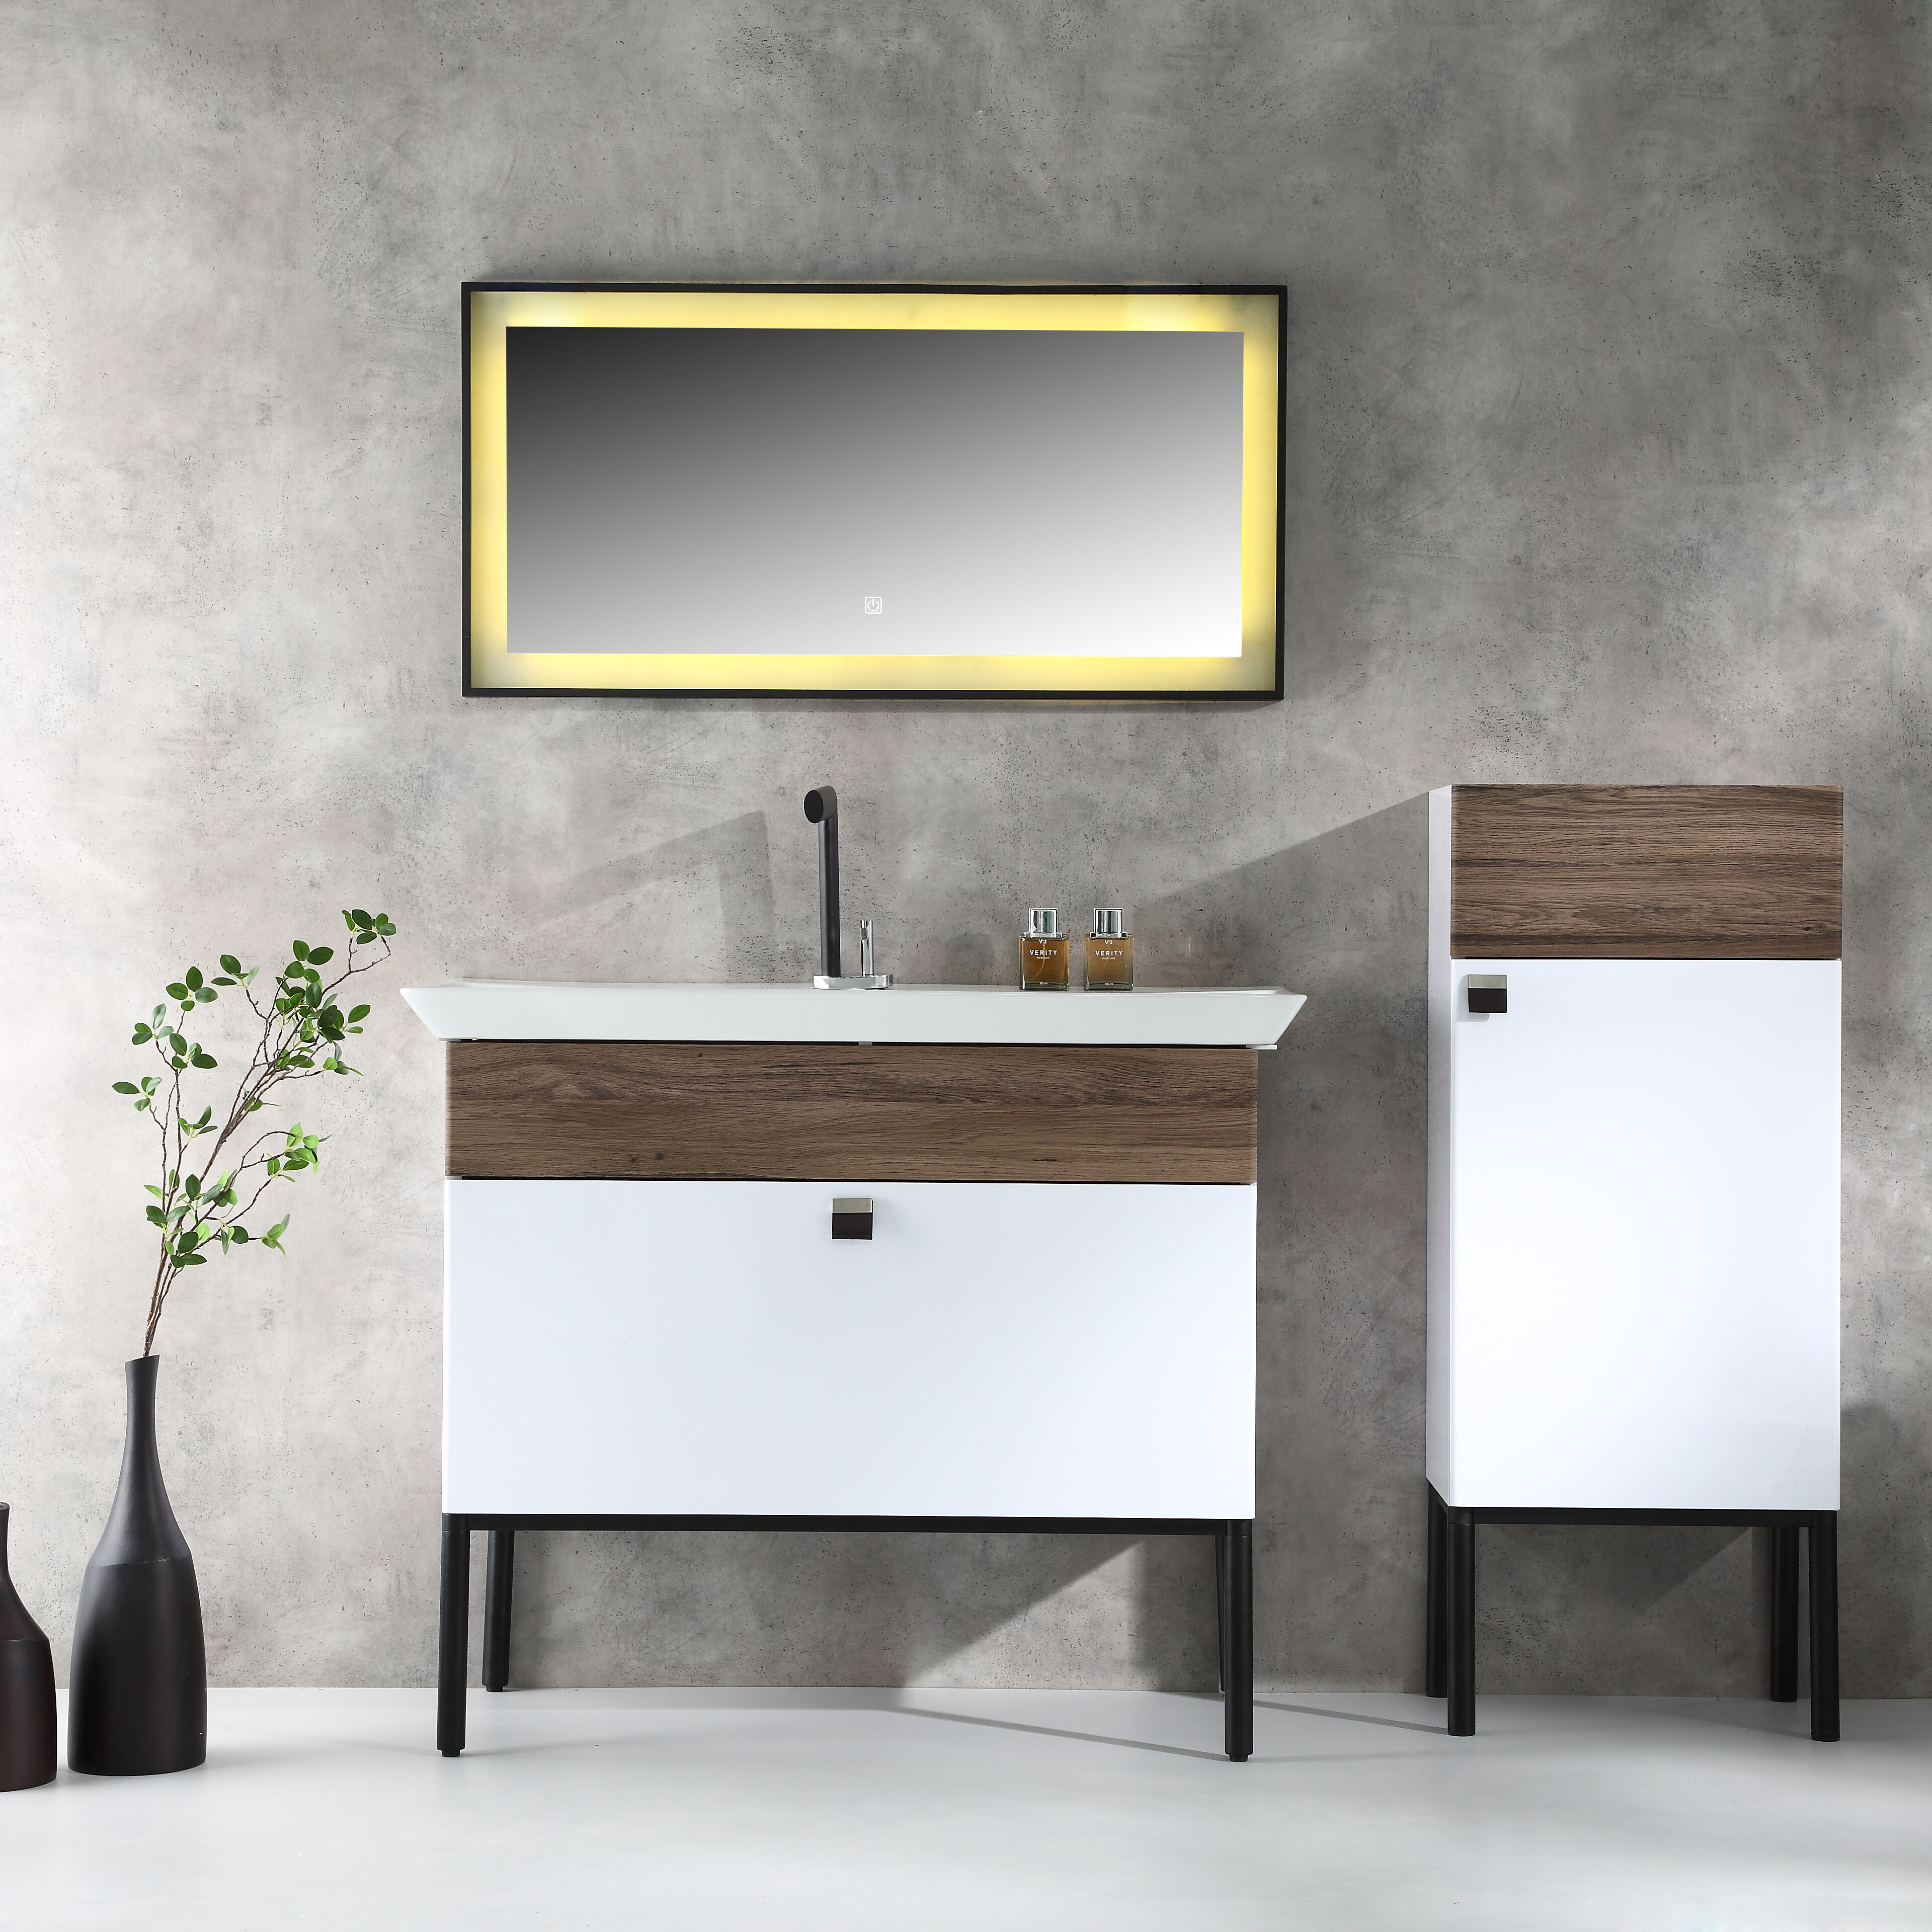 China bathroom sink cabinet manufacturers, China bathroom sink cabinet suppliers